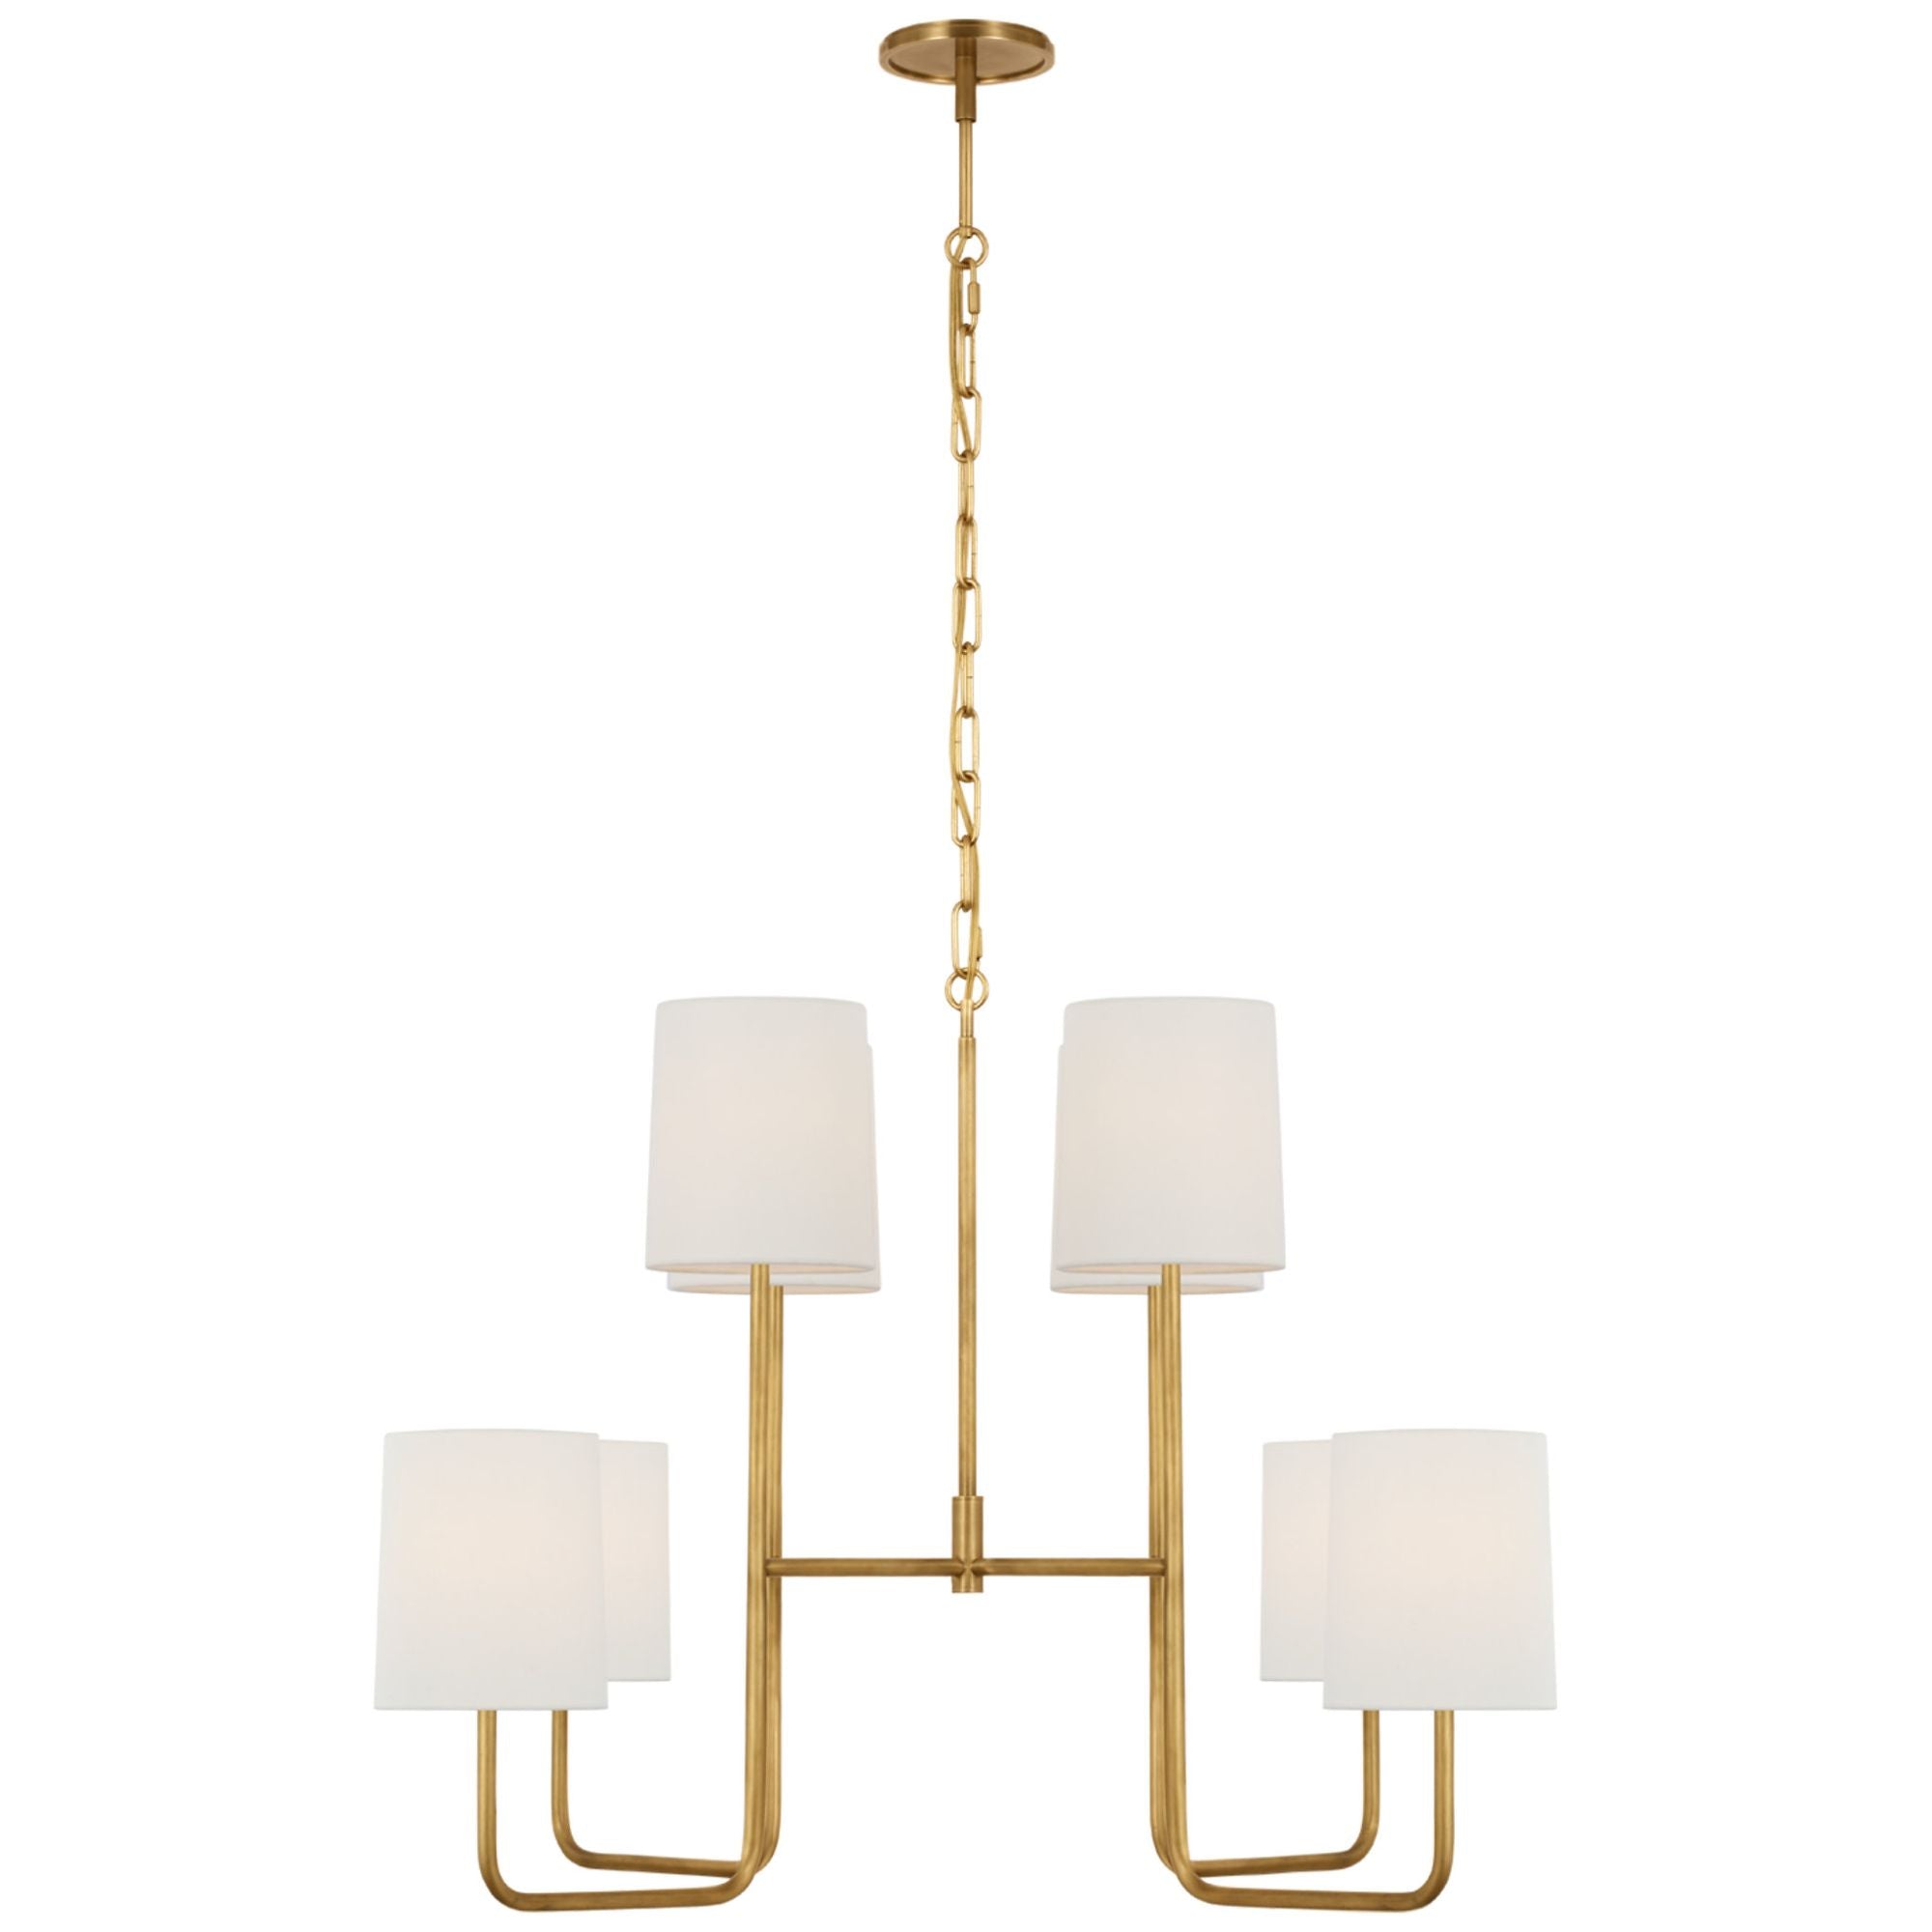 Barbara Barry Go Lightly Extra Large Two Tier Chandelier in Soft Brass with Linen Shades